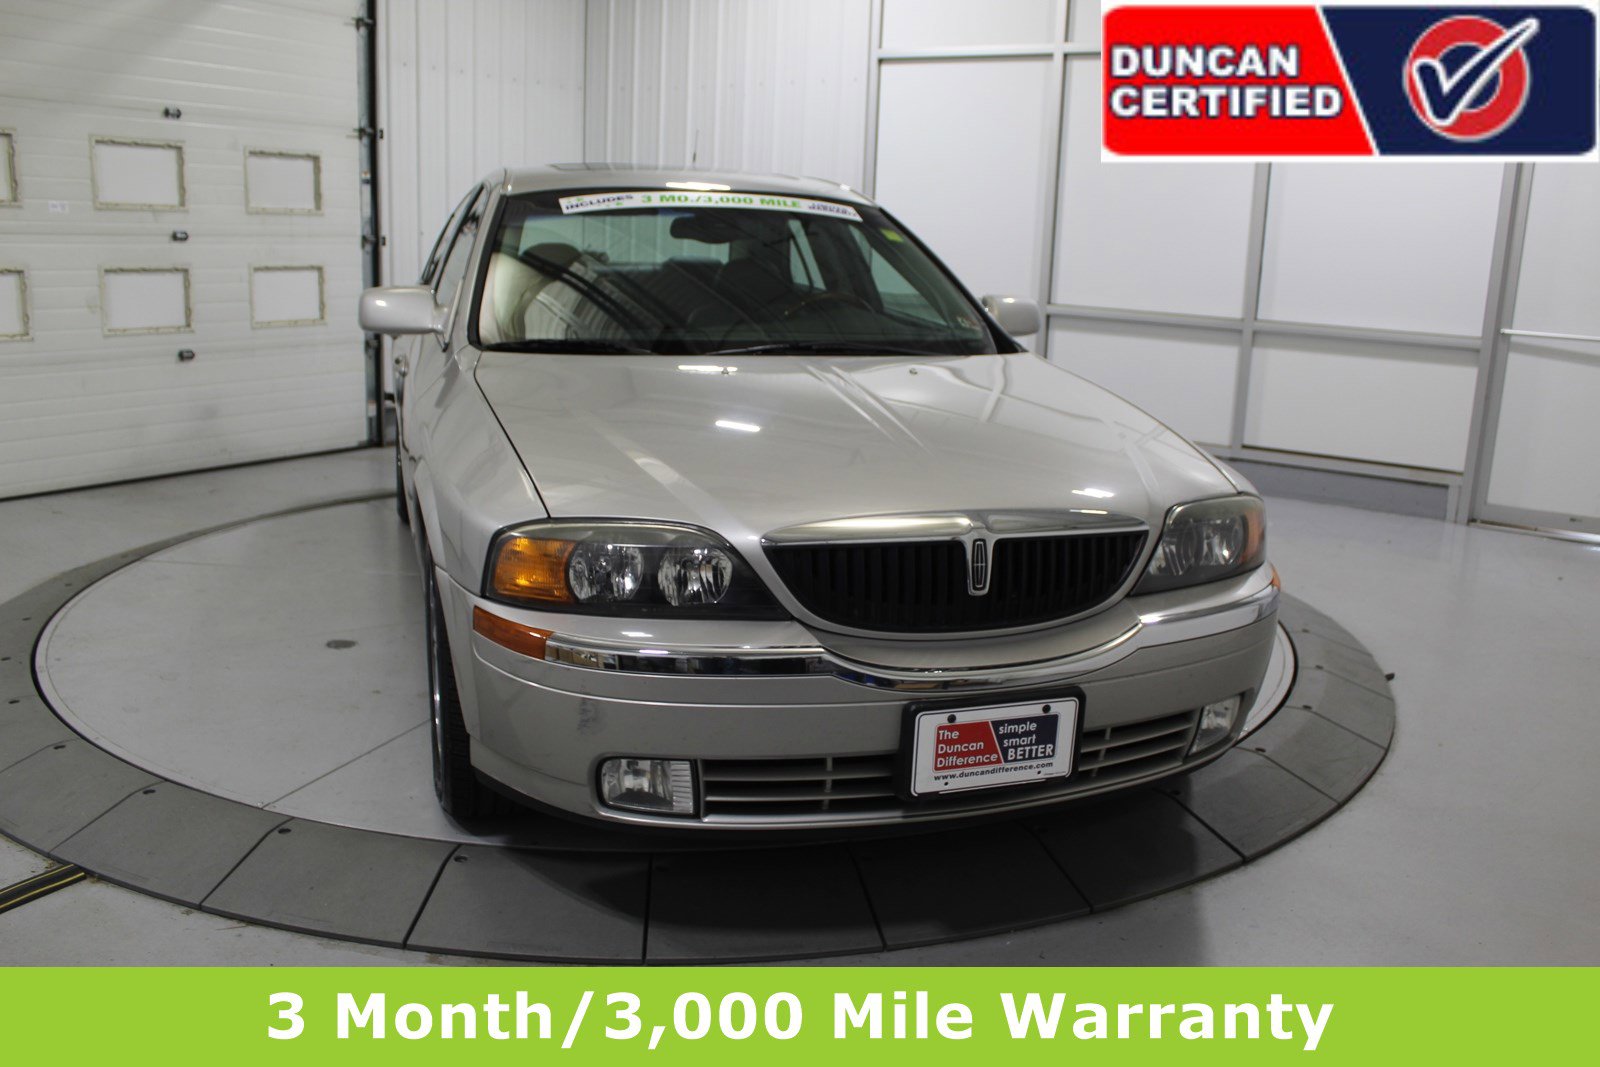 Used 2002 Lincoln LS for Sale Right Now - Autotrader